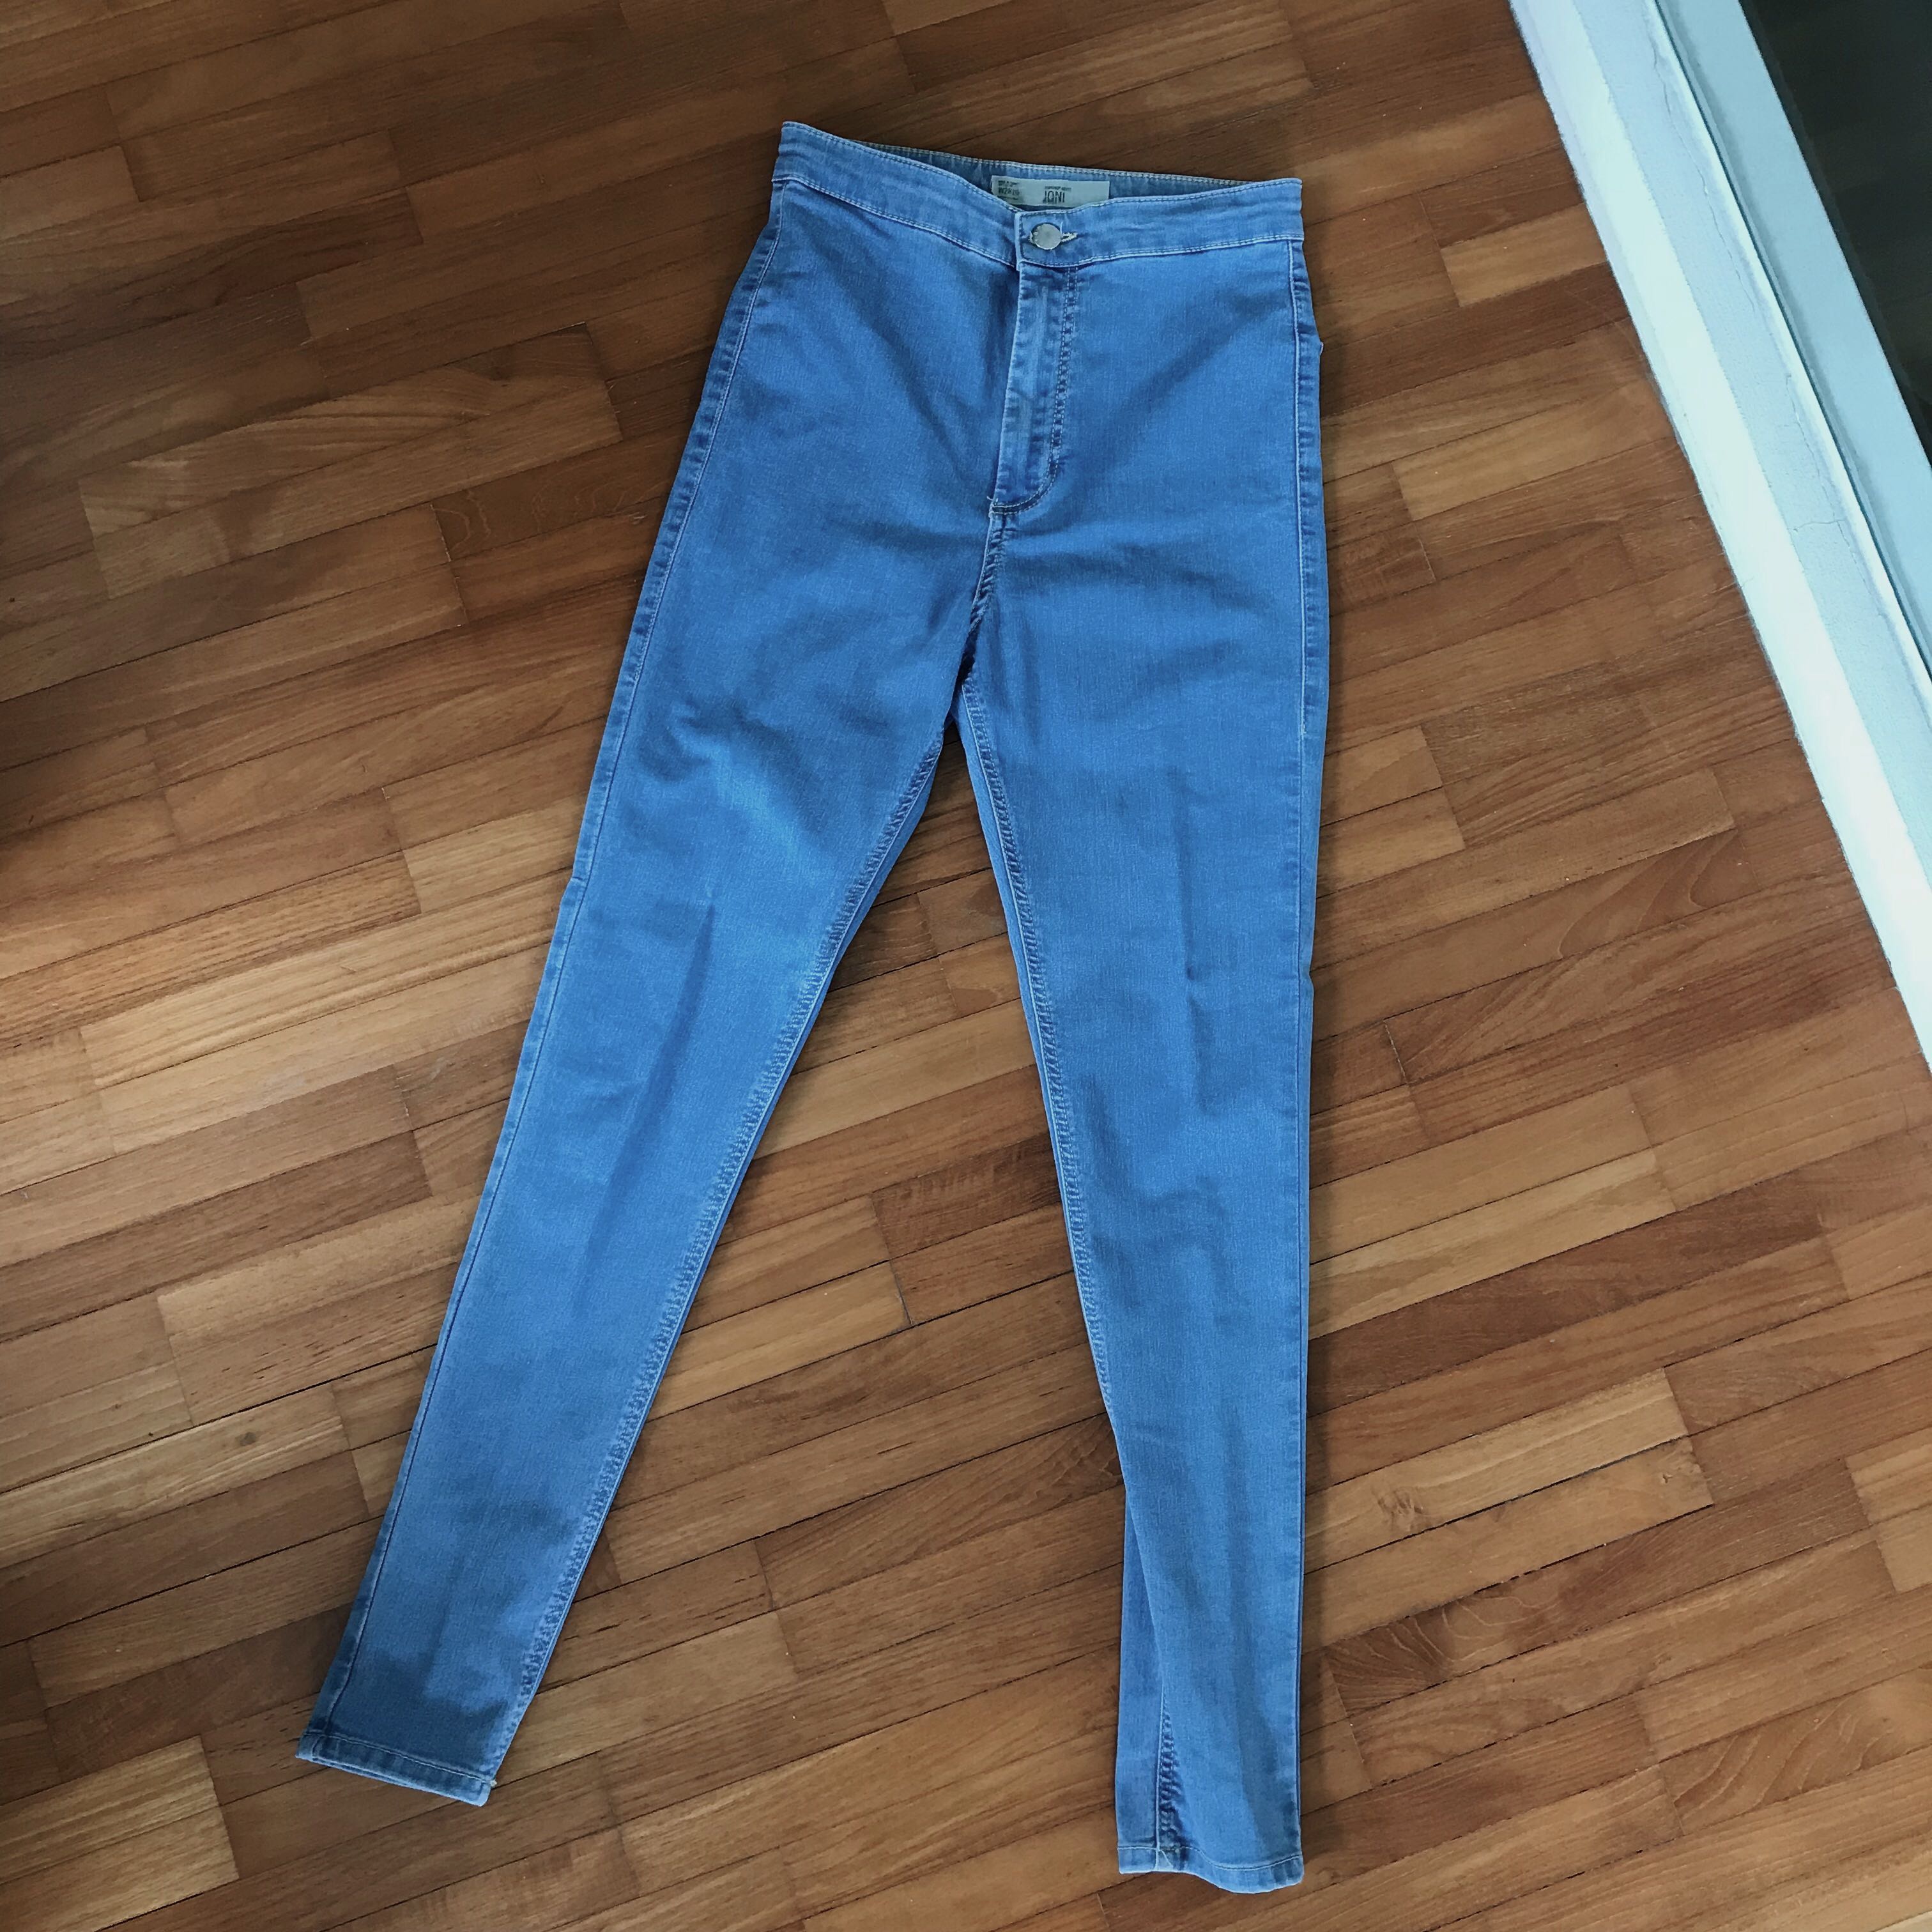 high waisted women's jeans topshop